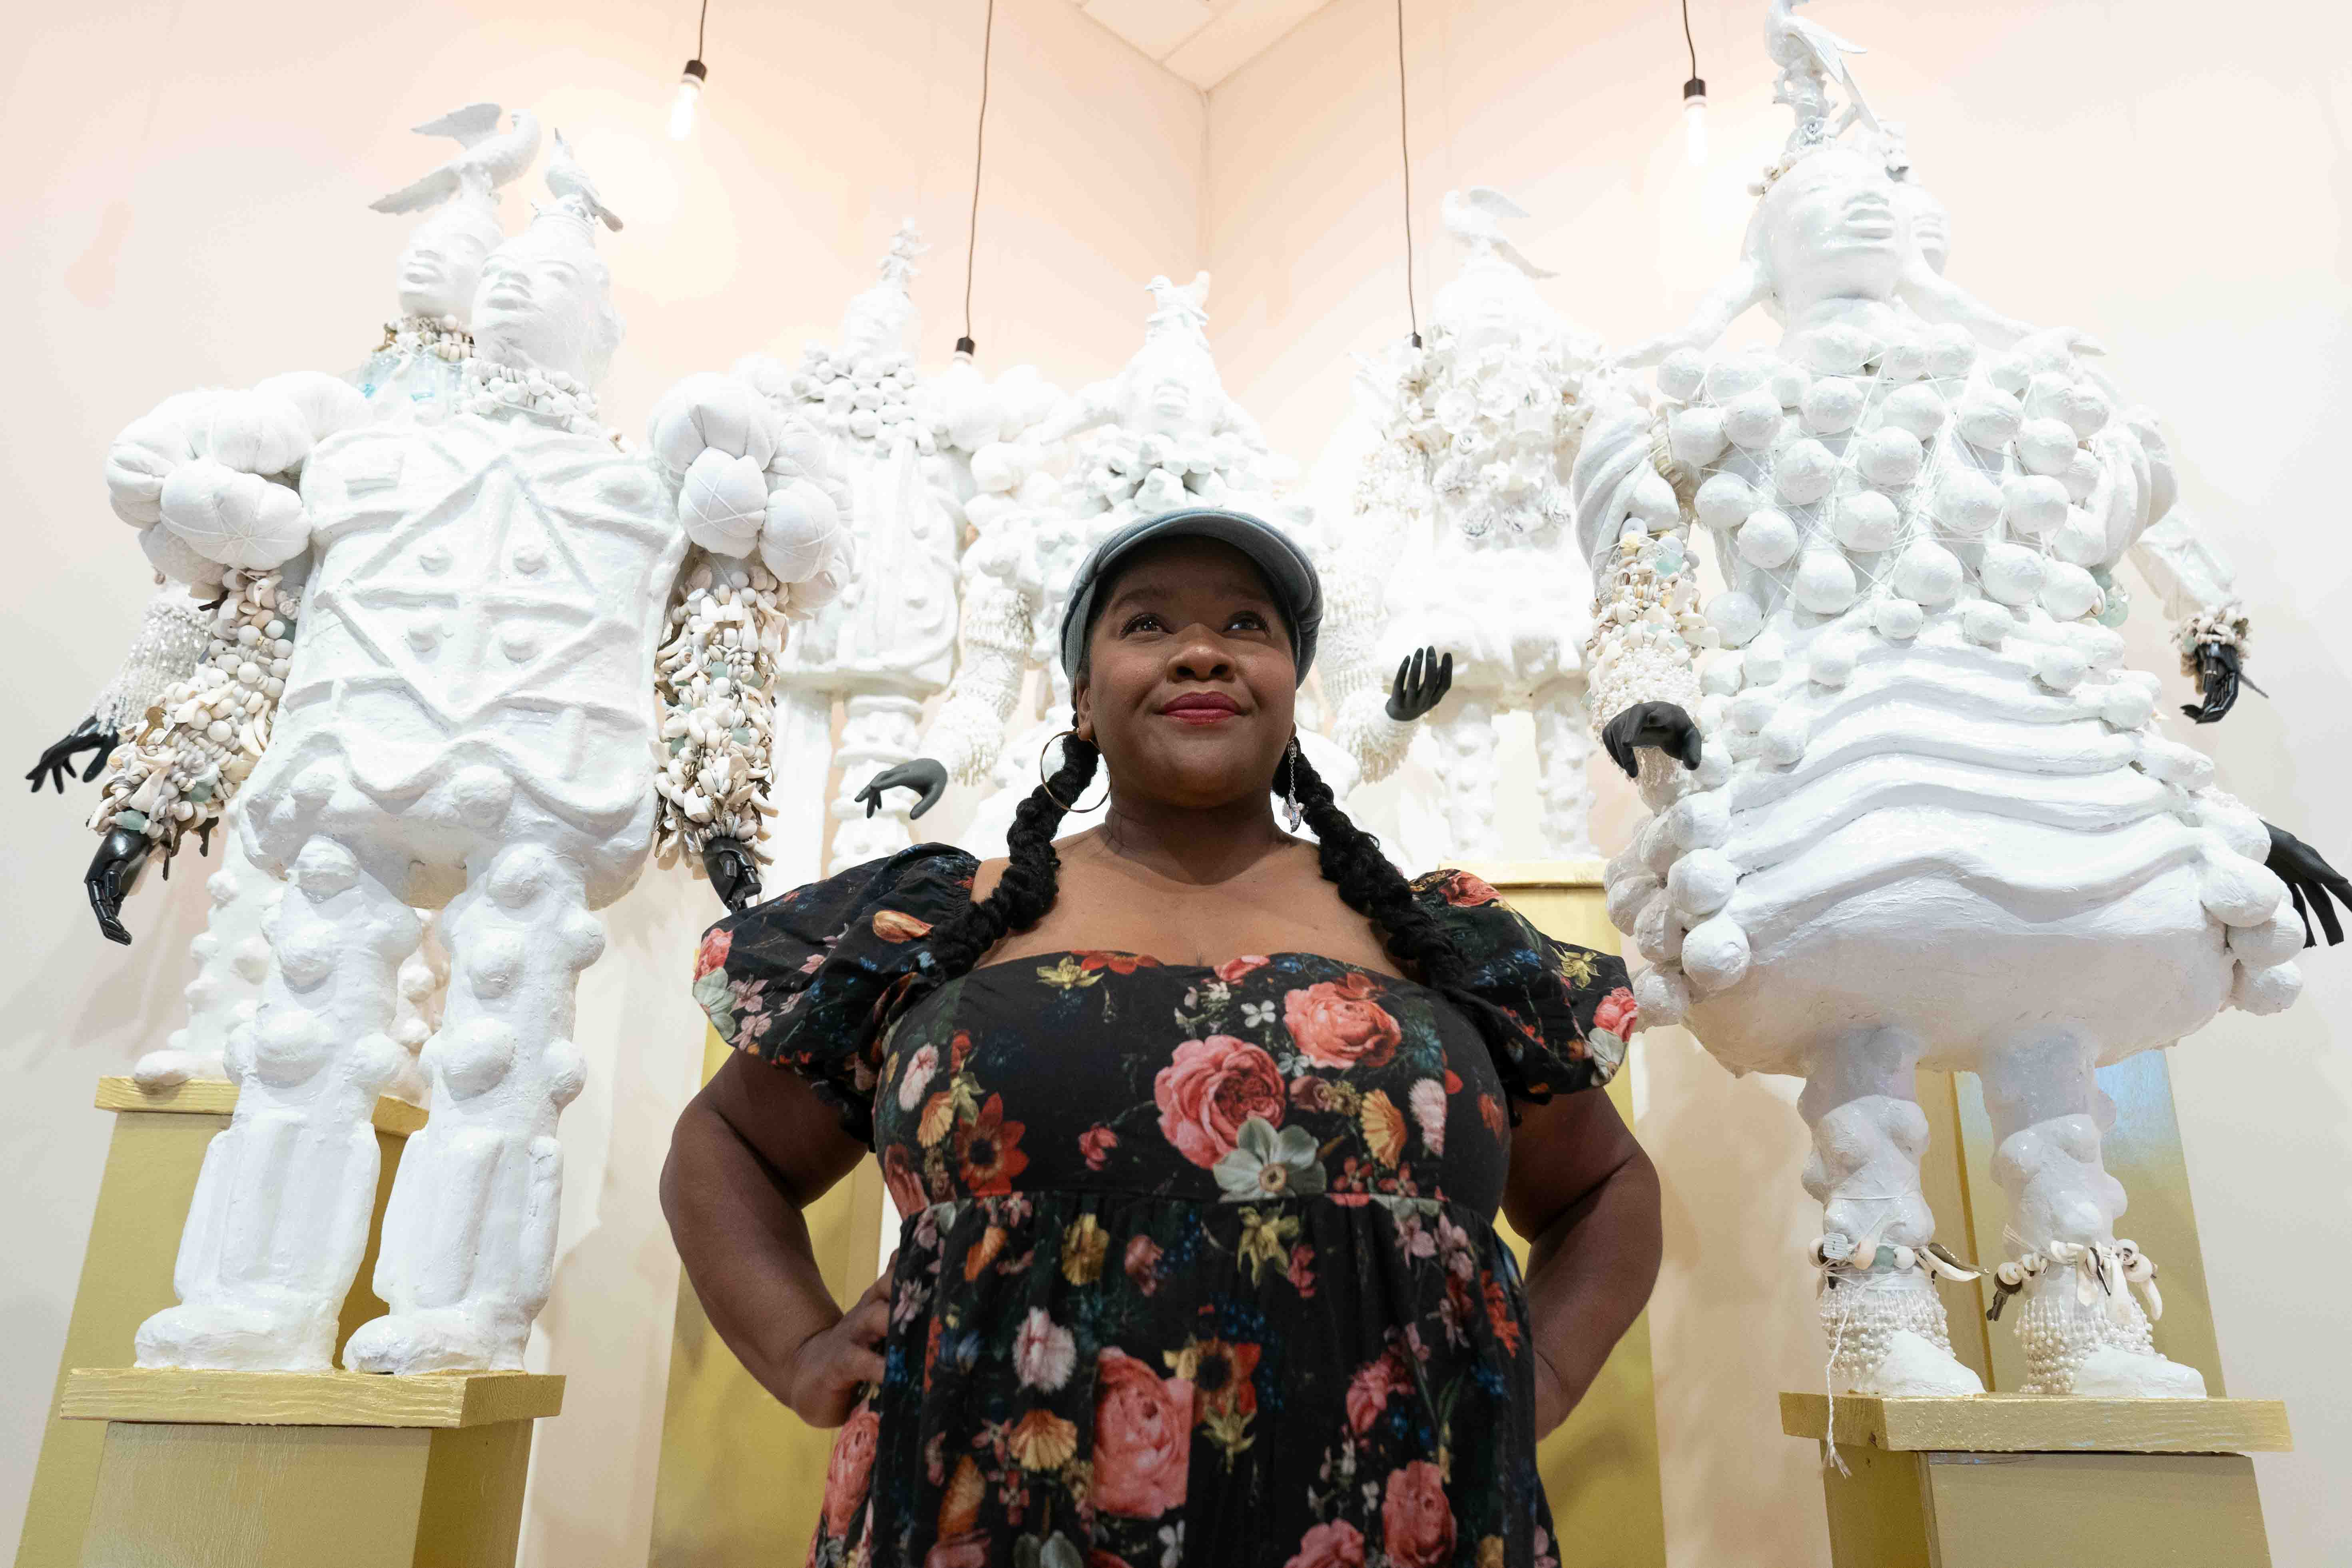 How artist vanessa german worked with Topekans for Brown v. Board exhibit 'CRAVING LIGHT'